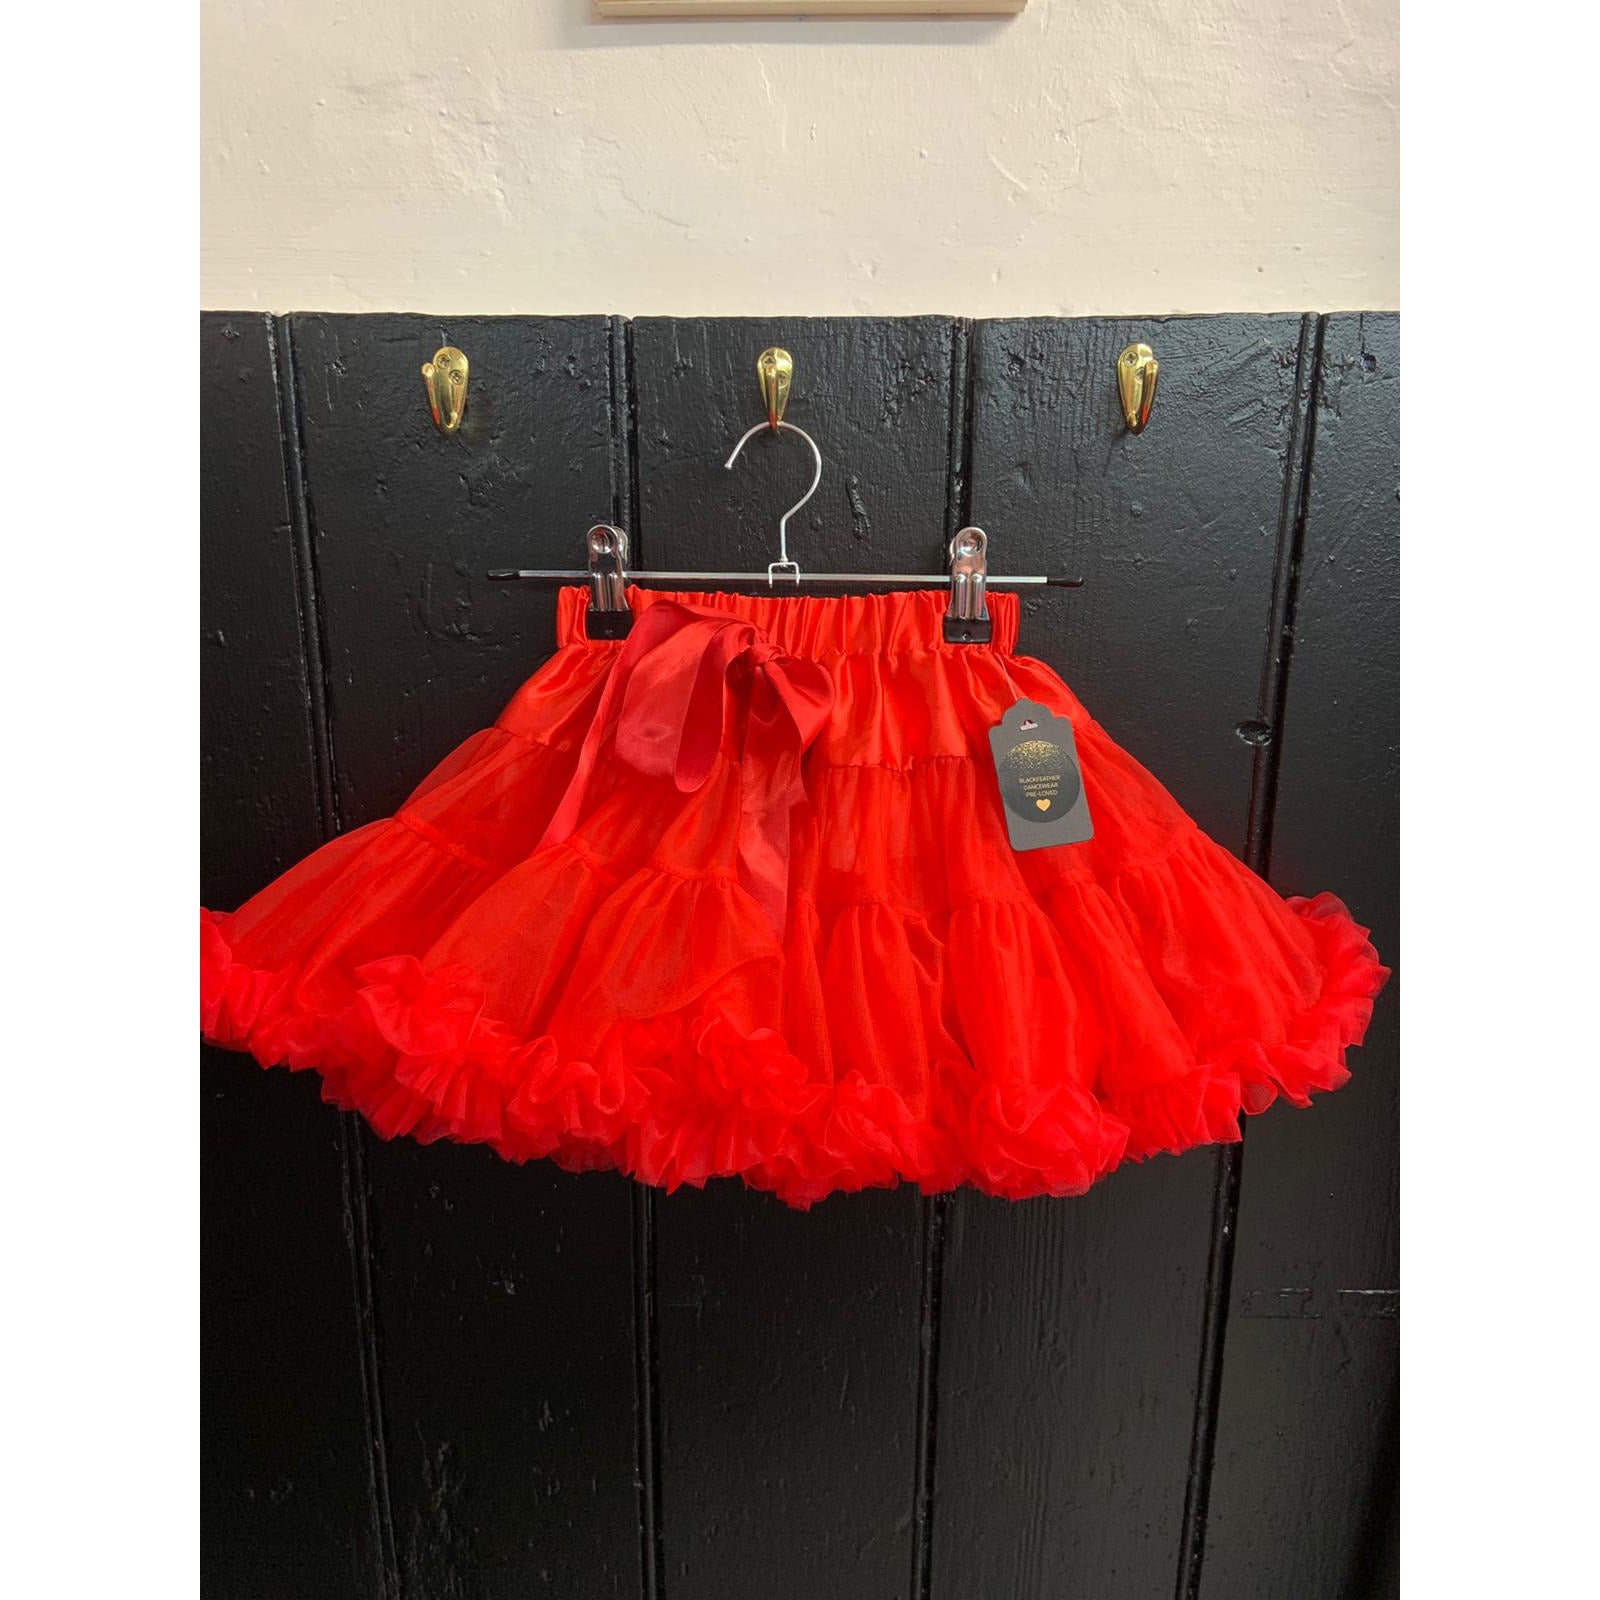 PRE-LOVED Red Layered Puffy Skirt - Child Small